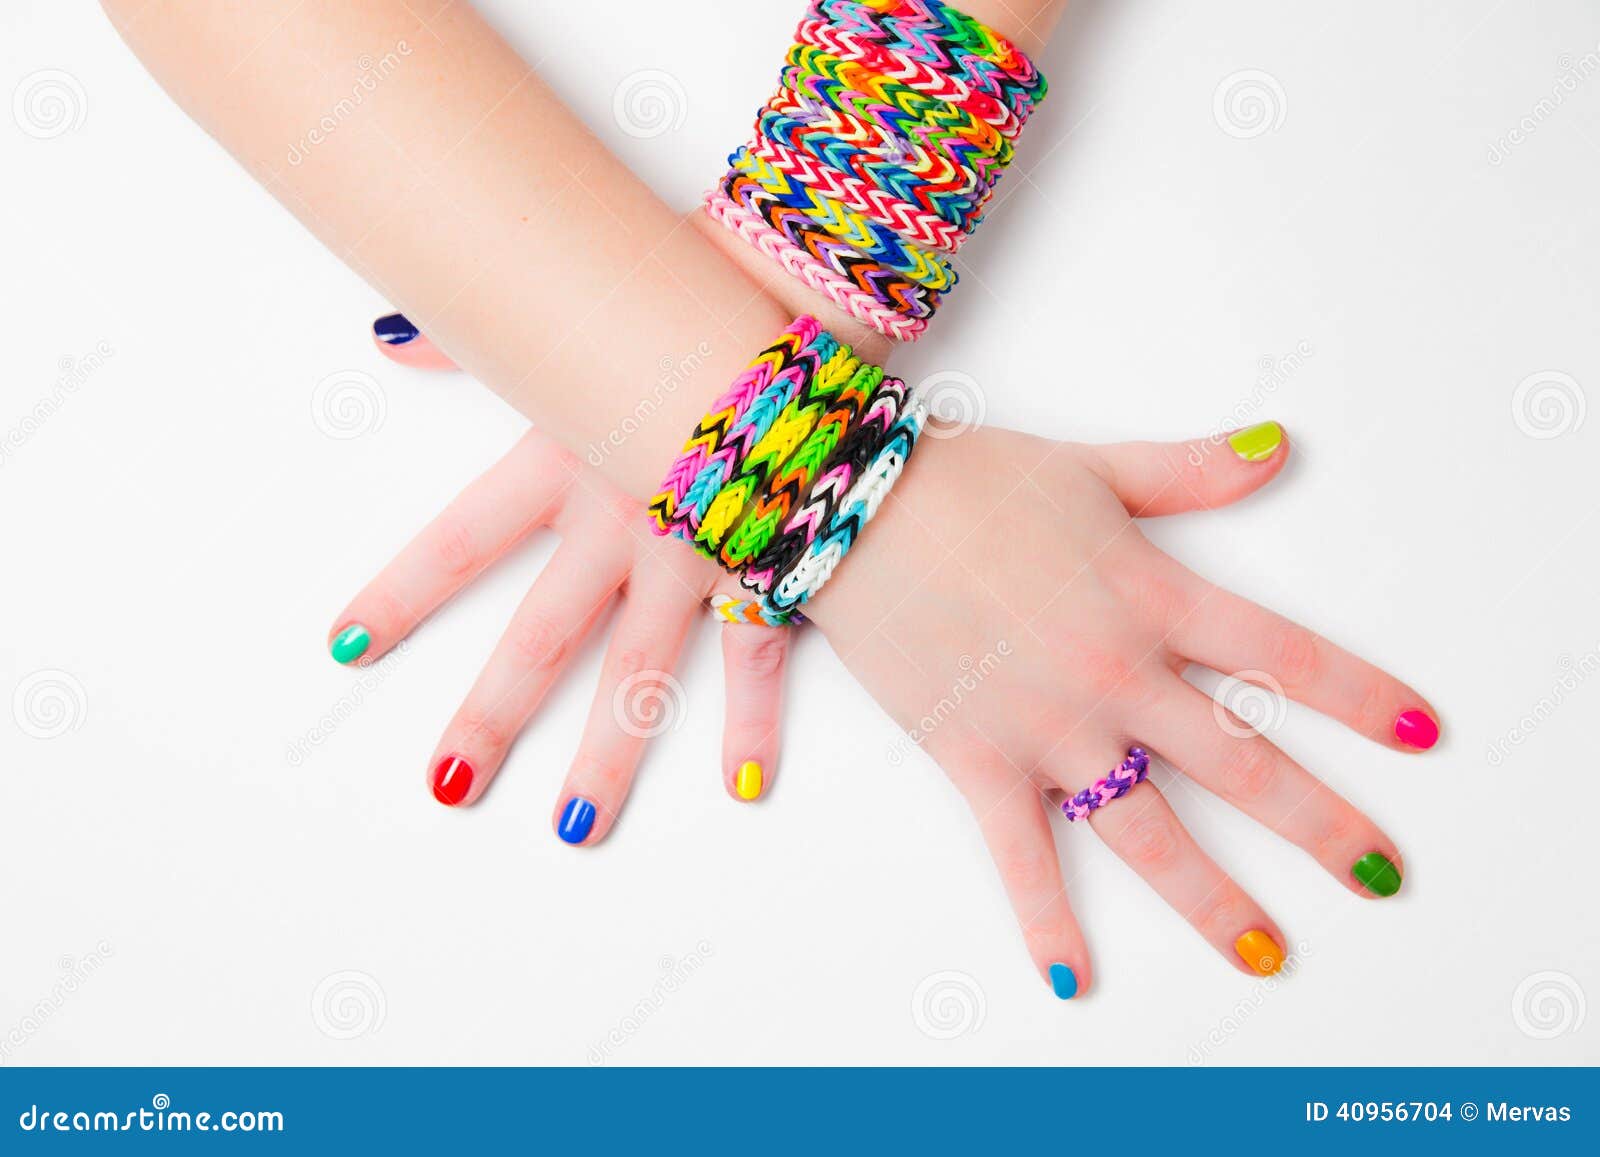 Rainbow loom rubber band bracelet hi-res stock photography and images -  Page 4 - Alamy